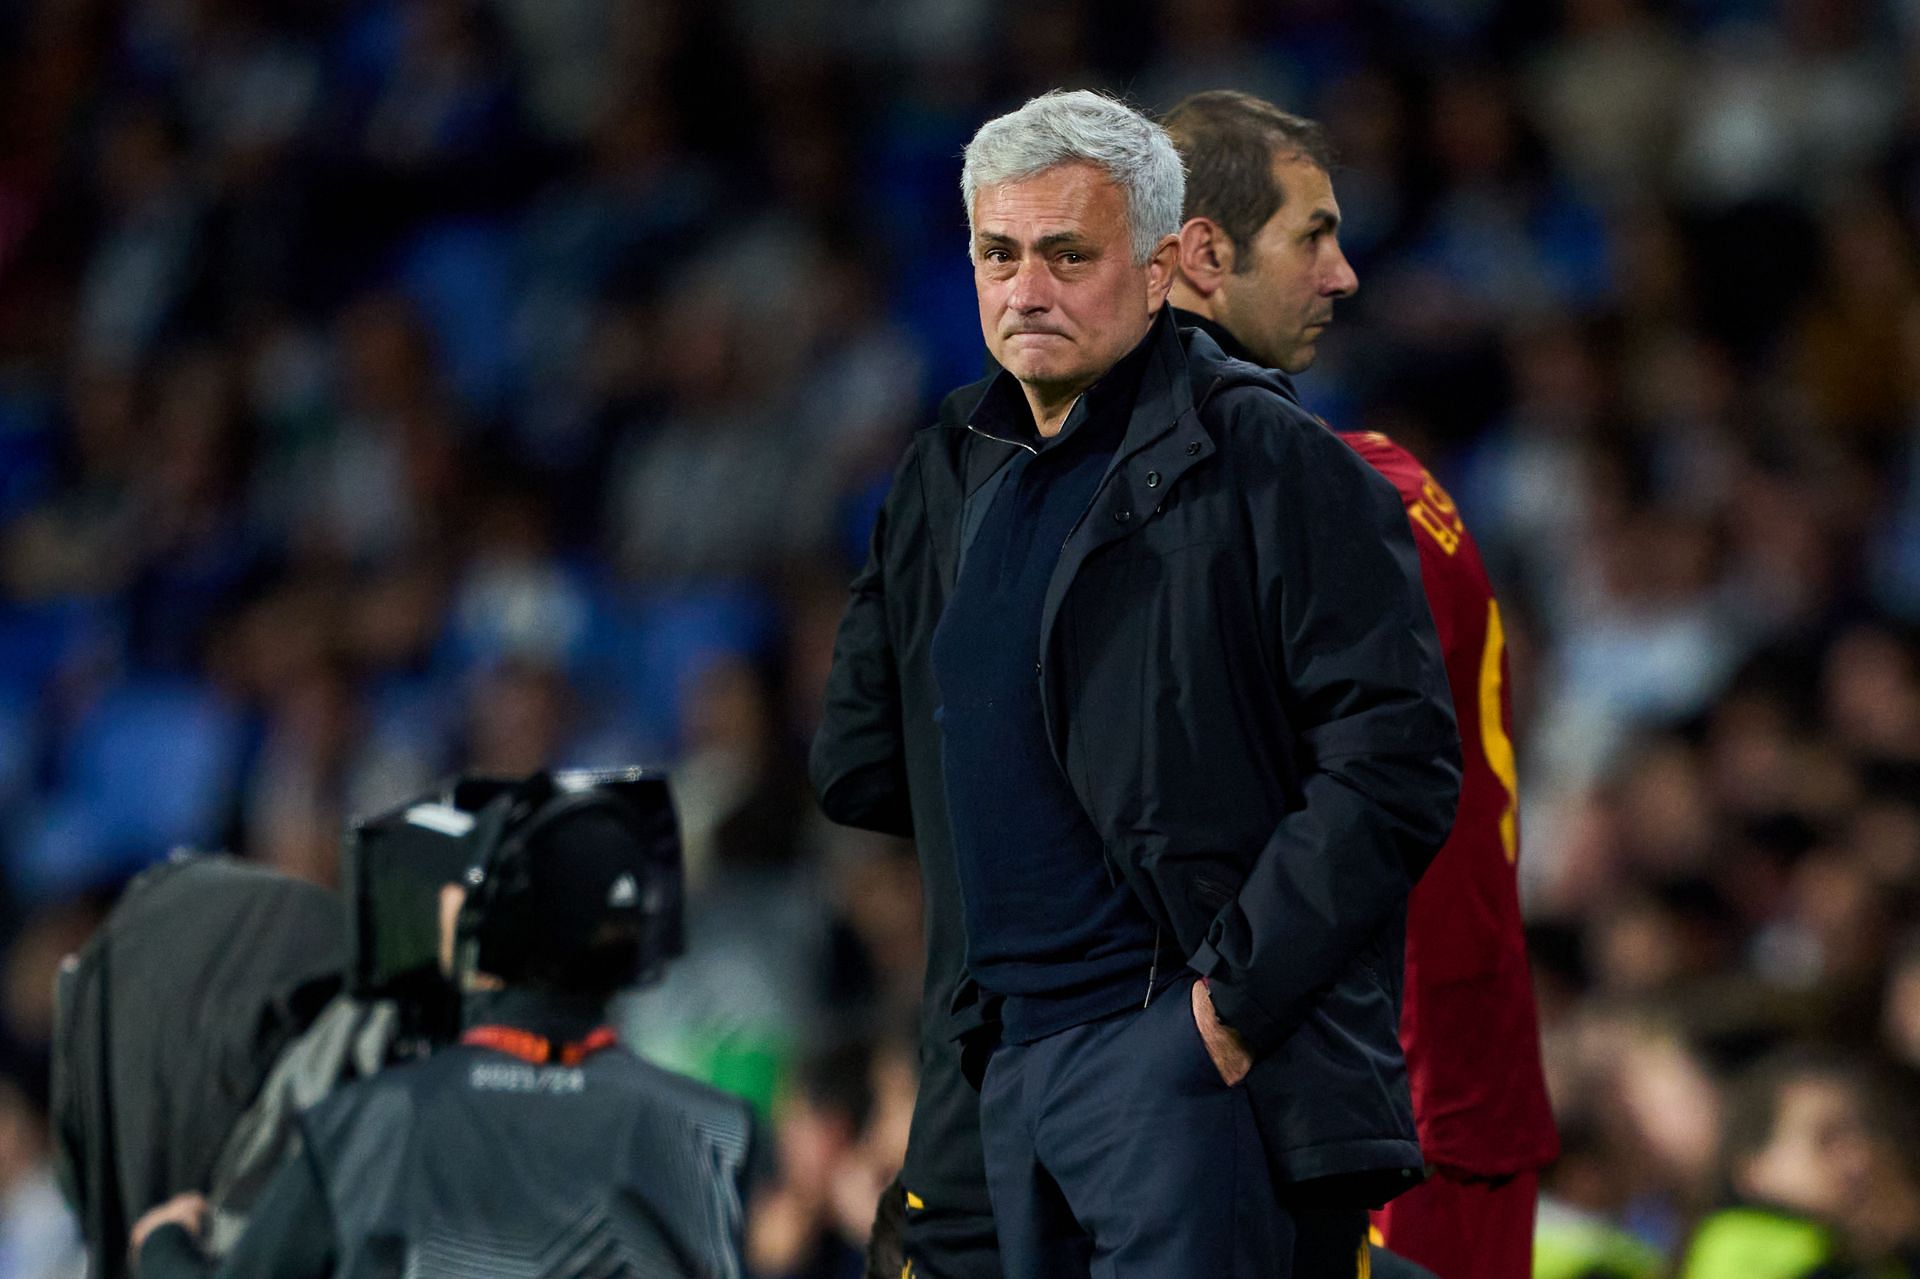 Jose Mourinho is in charge of AS Roma.